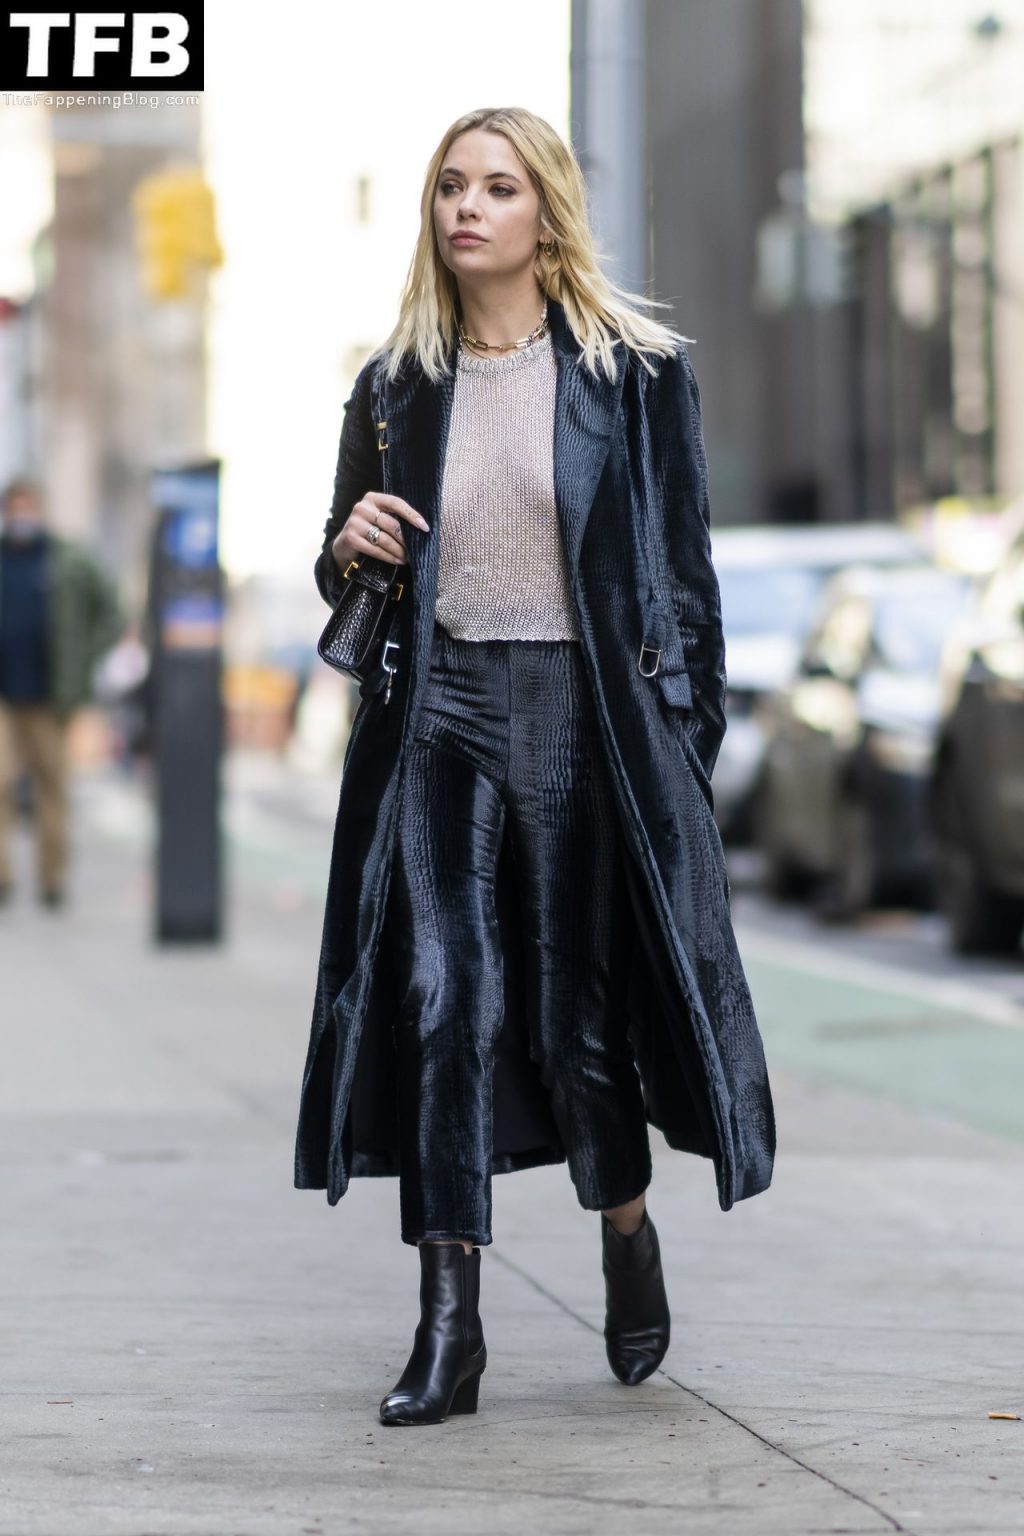 Ashley Benson Sexy The Fappening Blog 2 1 1024x1536 - Braless Ashley Benson Looks Stylish While Heading to a Meeting in NYC (20 Photos)